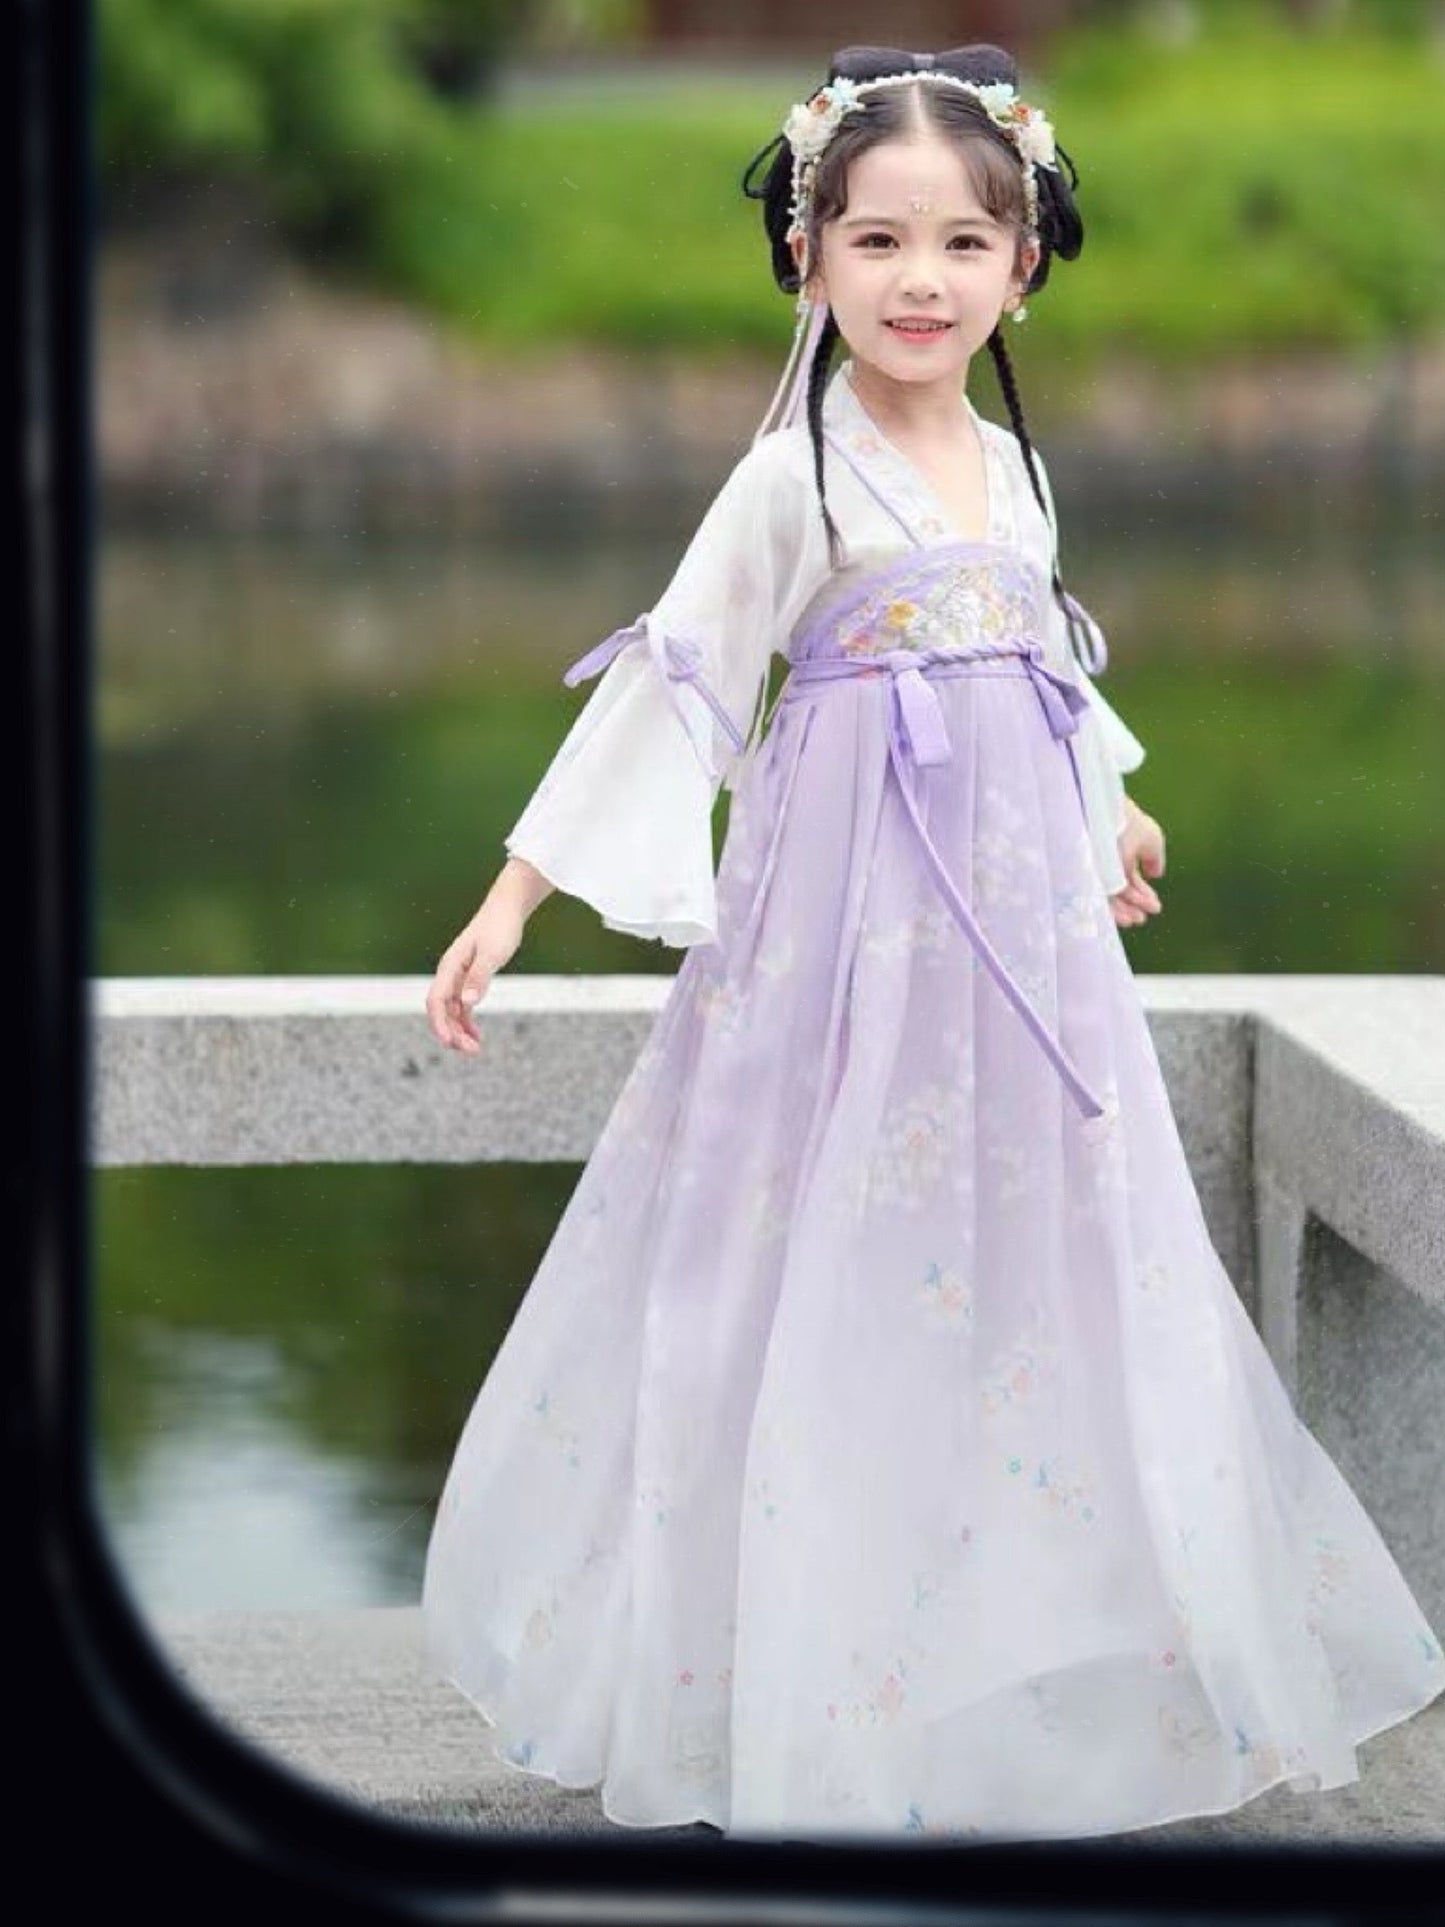 PreOrder: Purple Blossom Feast: Ethereal Tang Dynasty Hanfu for Girls